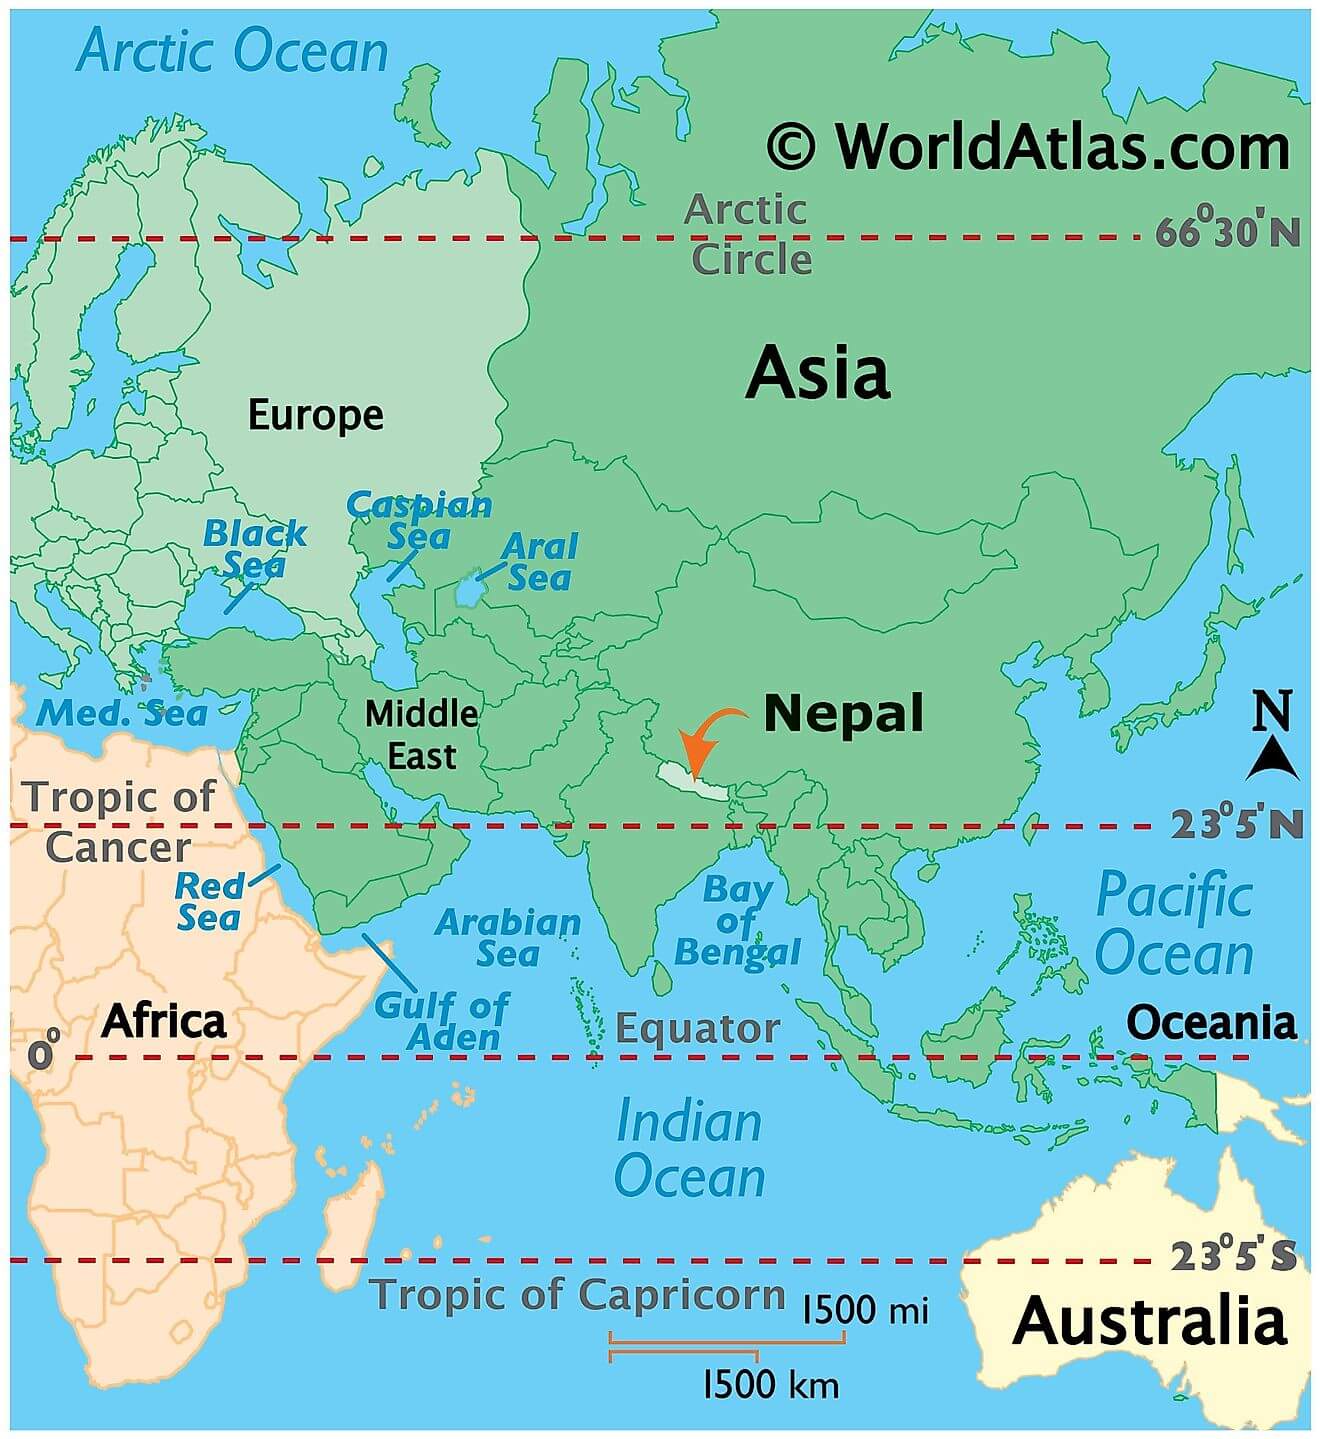 Where is Nepal?